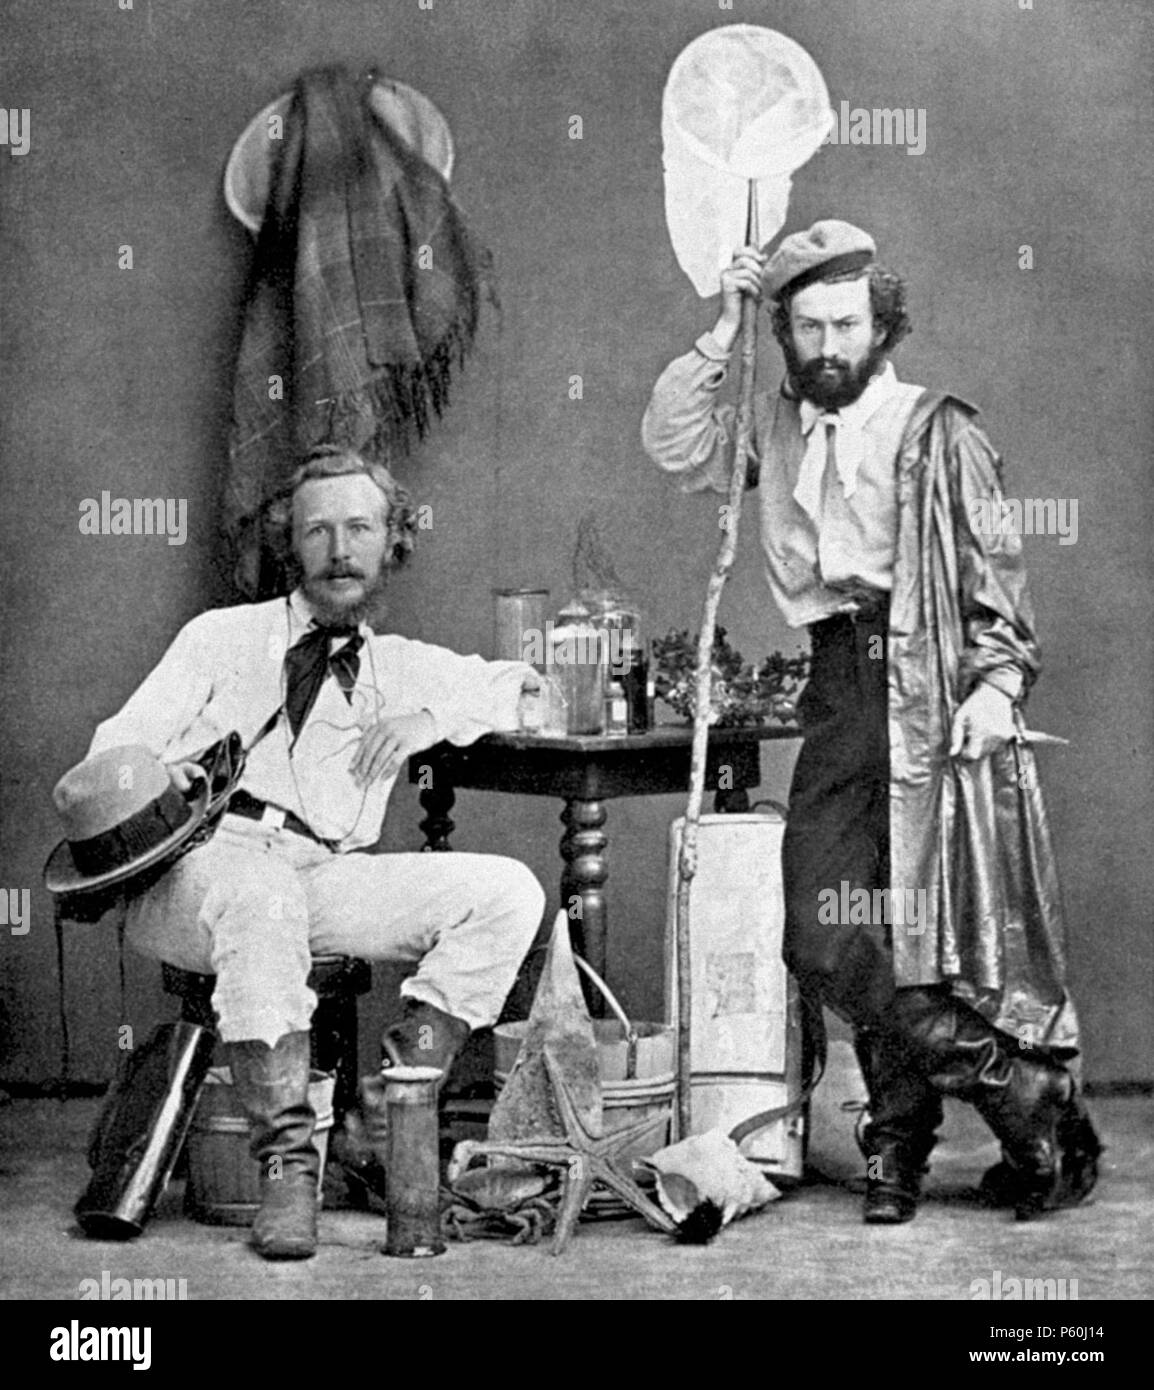 N/A. Ernst Haeckel and his assistant Nicholas Miklouho-Maclay, photographed in the Canary Islands in 1866. 1866. This file is lacking author information. 523 Ernst Haeckel and von Miclucho-Maclay 1866 Stock Photo